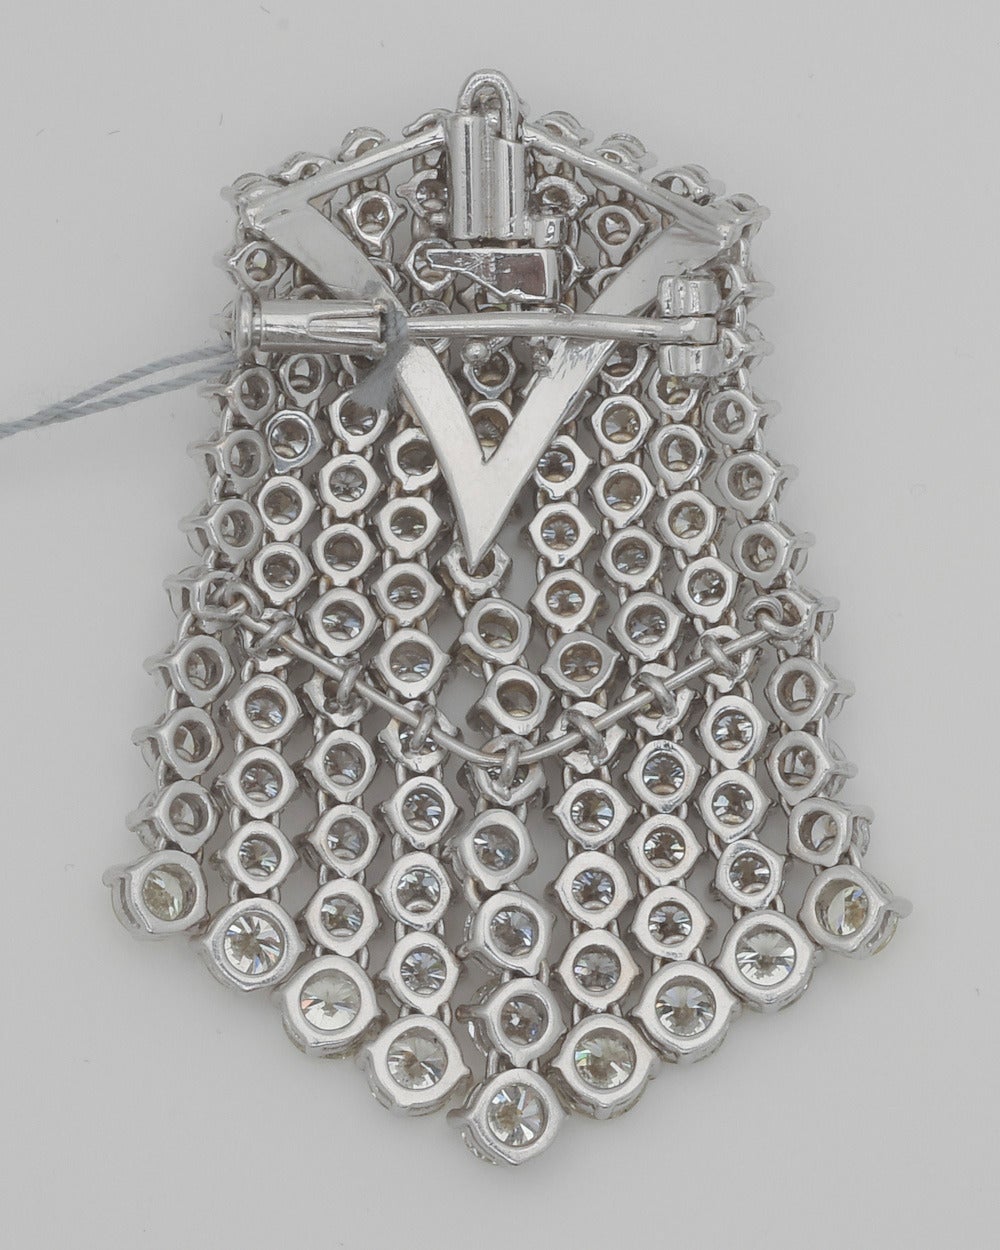 Diamond waterfall pendant brooch, showcasing rows of near-colorless graduating round diamonds each ending in a light yellow colored diamond, the upper portion of each diamond row fixed and lower portion designed as a flexible tassel, with 115